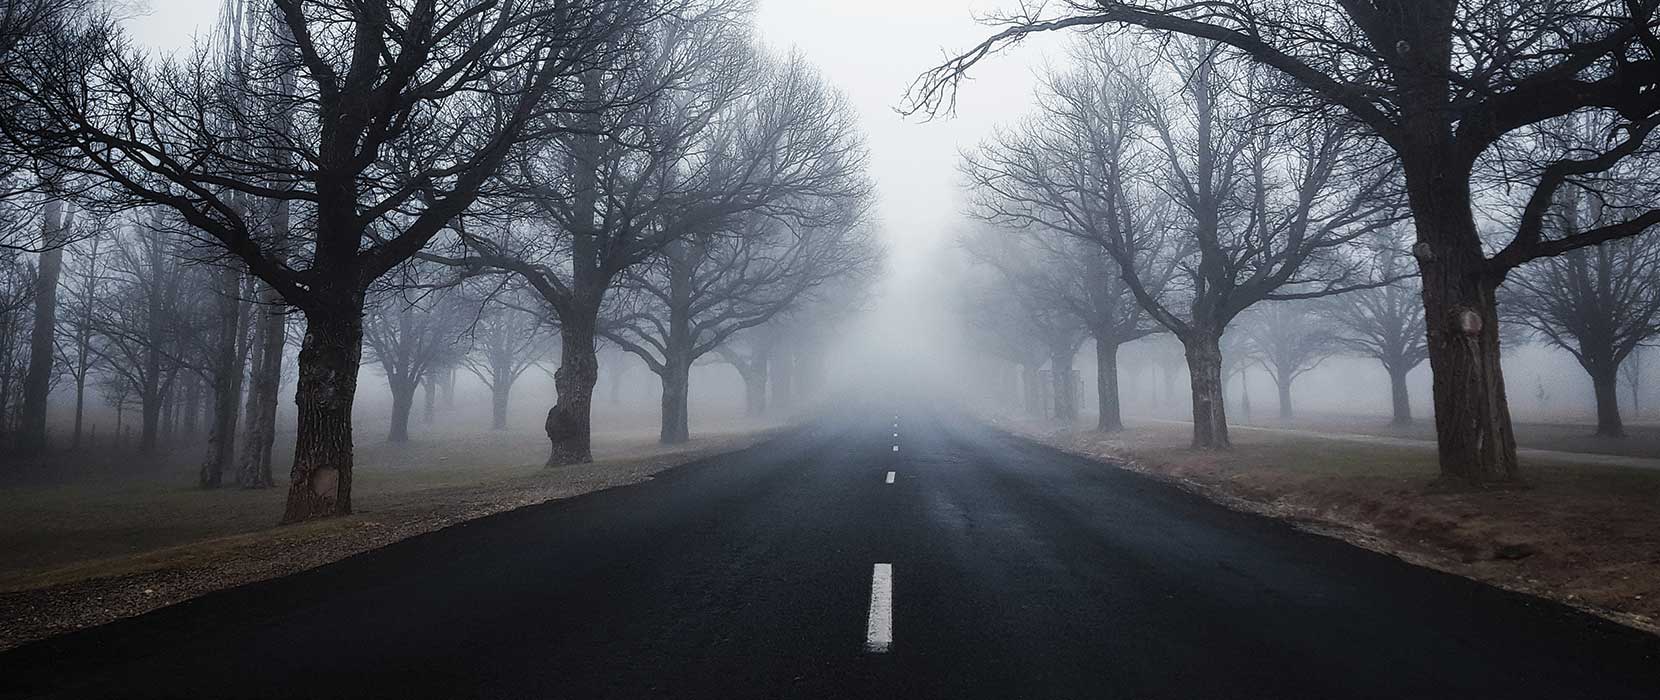 A misty road lined with deciduous trees in winter.